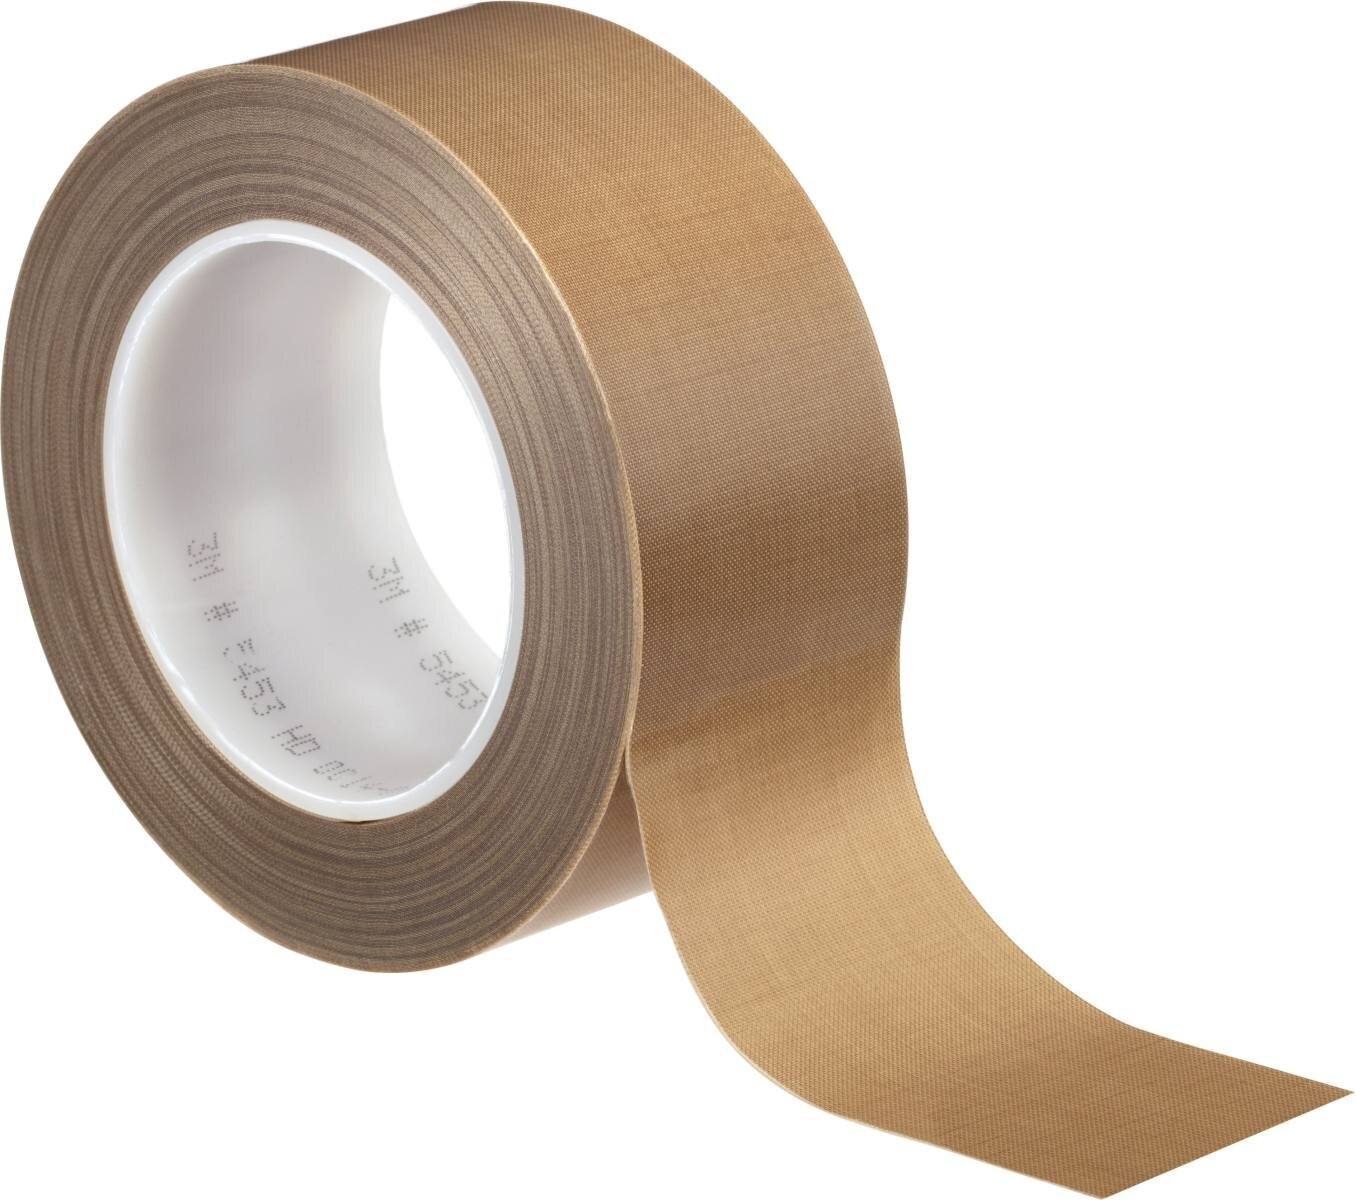 3M 5453 PTFE glass adhesive tape 76mmx33m, 0.22mm, silicone